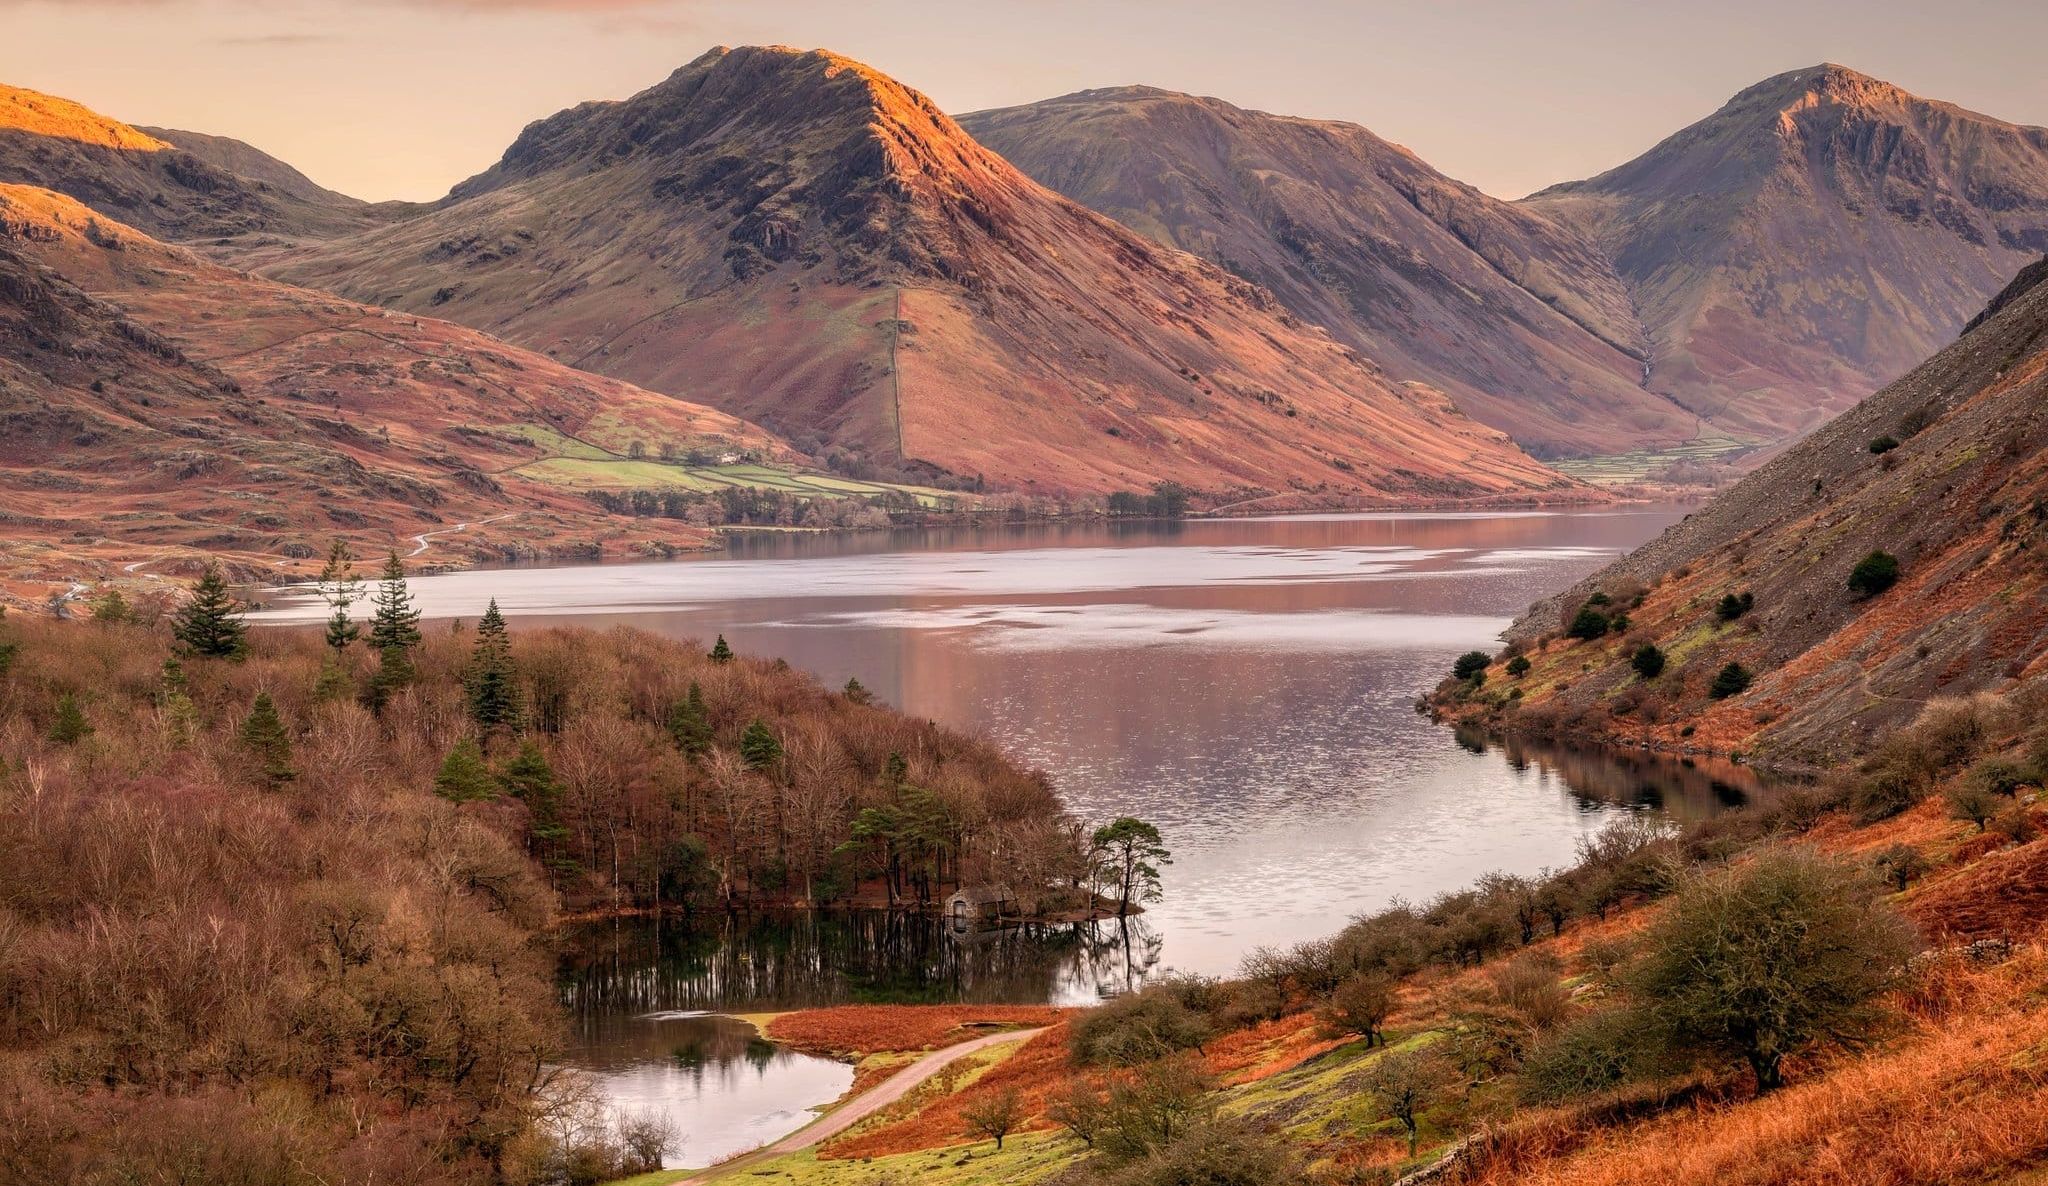 The Lake District of NW England